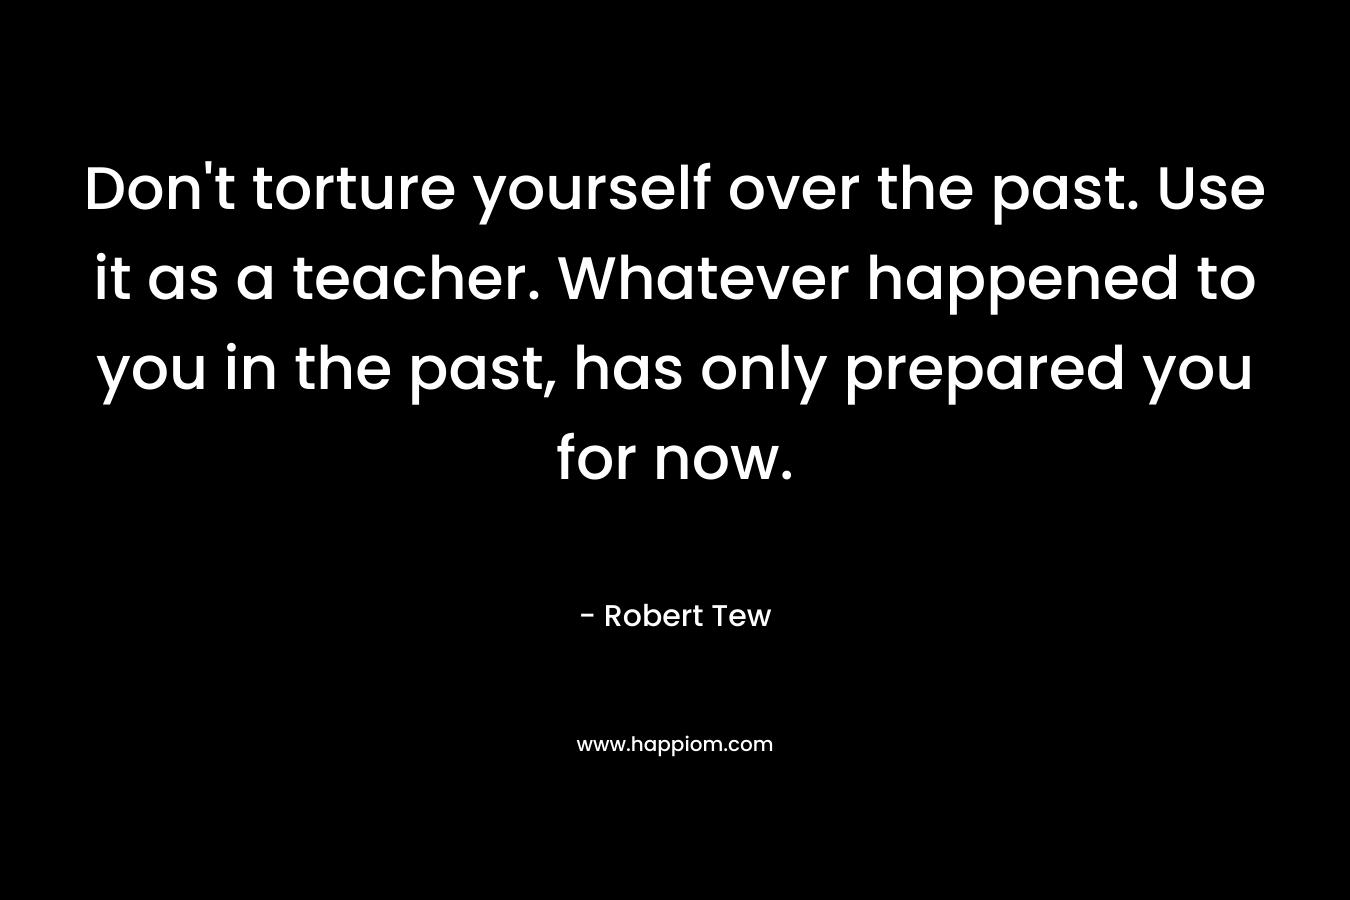 Don't torture yourself over the past. Use it as a teacher. Whatever happened to you in the past, has only prepared you for now.